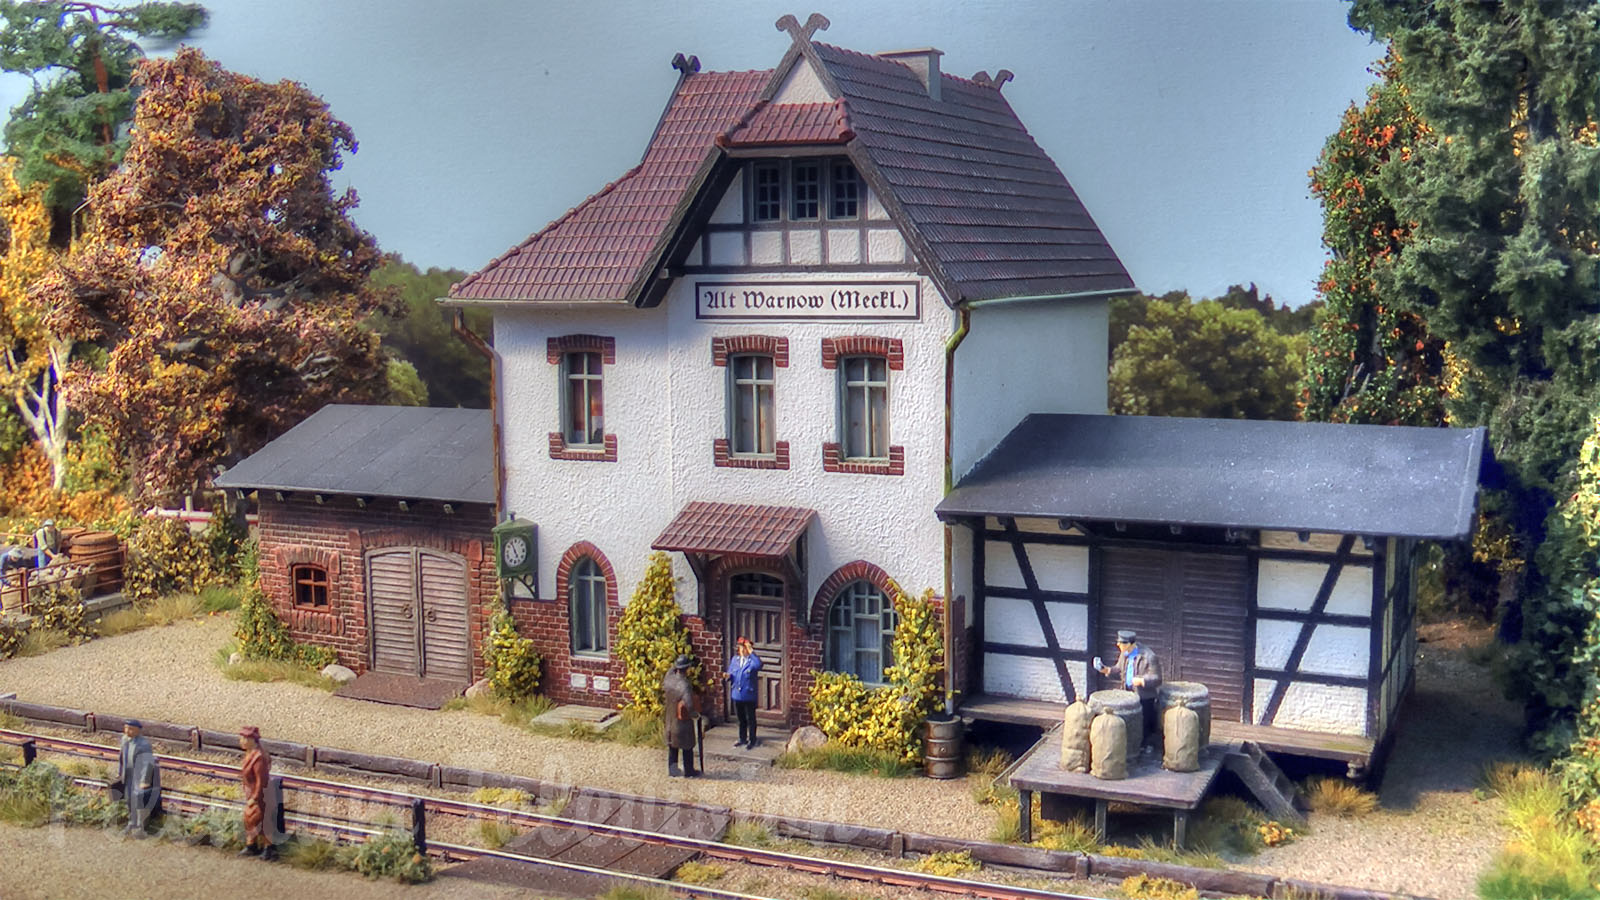 Countryside HO Scale Layout of Northern Germany - Old Steam Locomotives and Trains